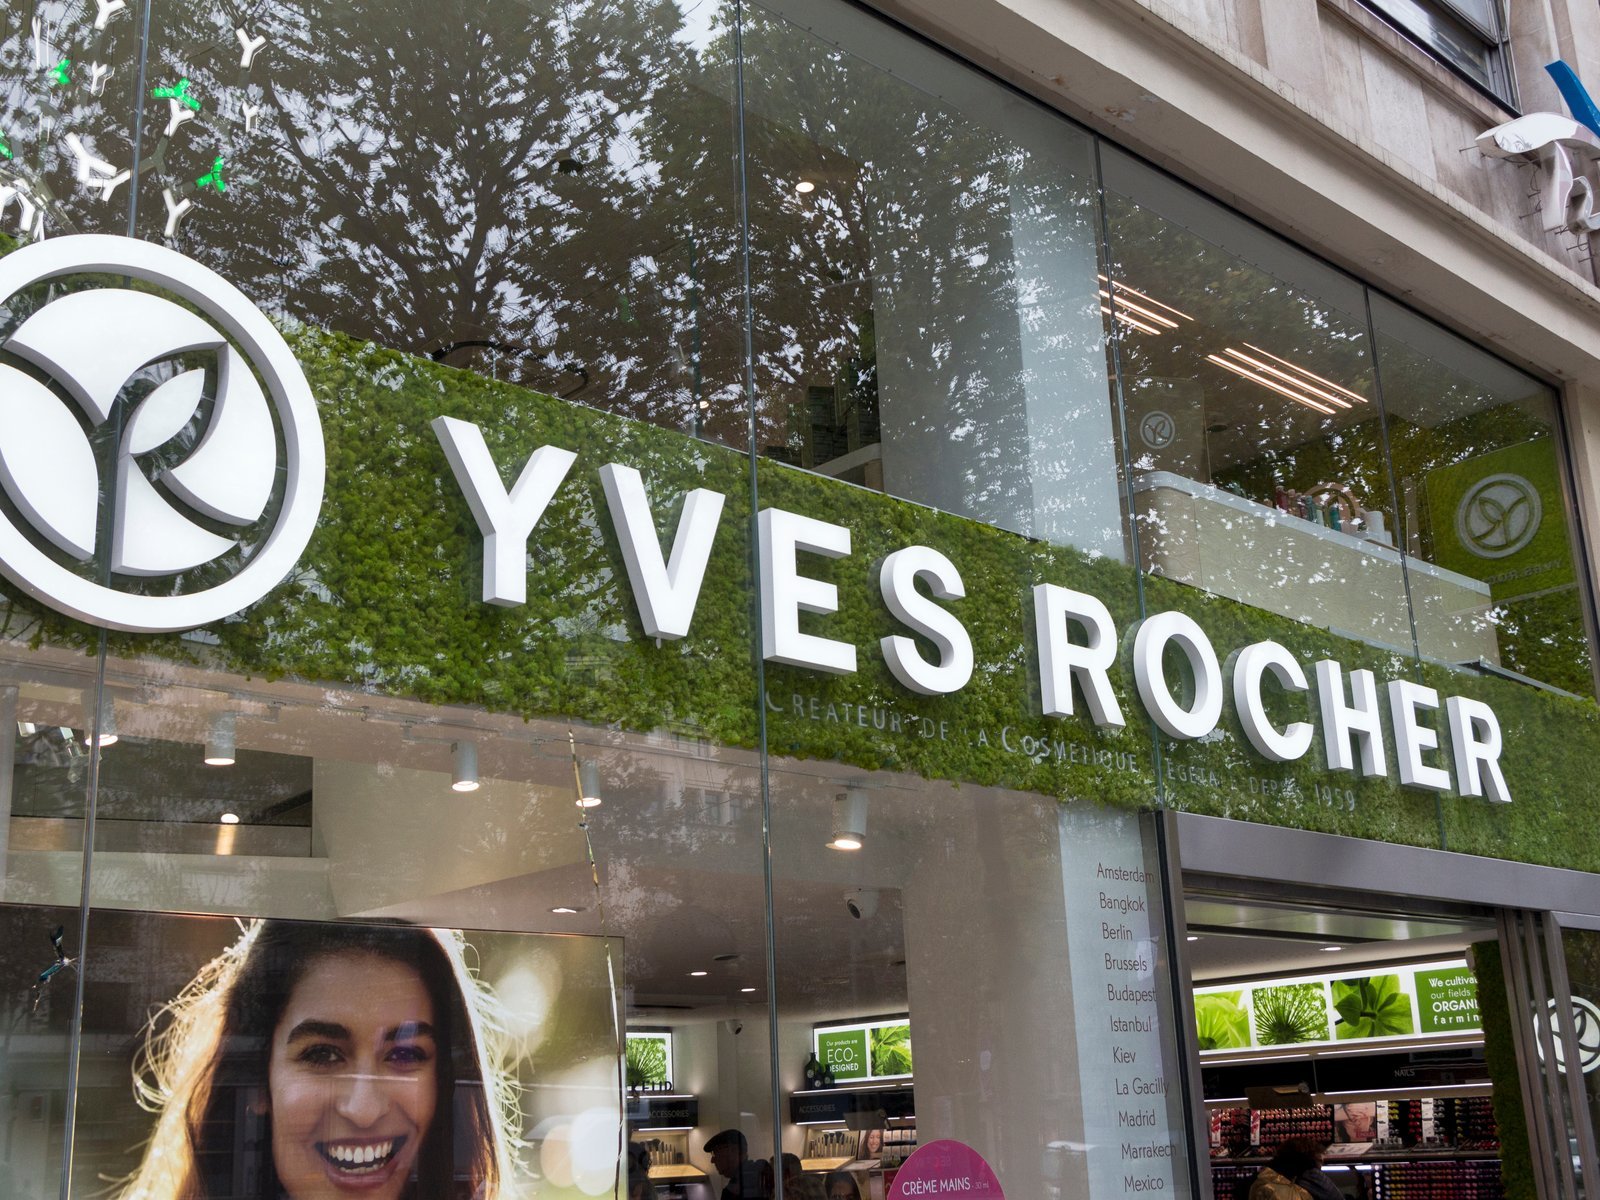 Yves Rocher Success Story